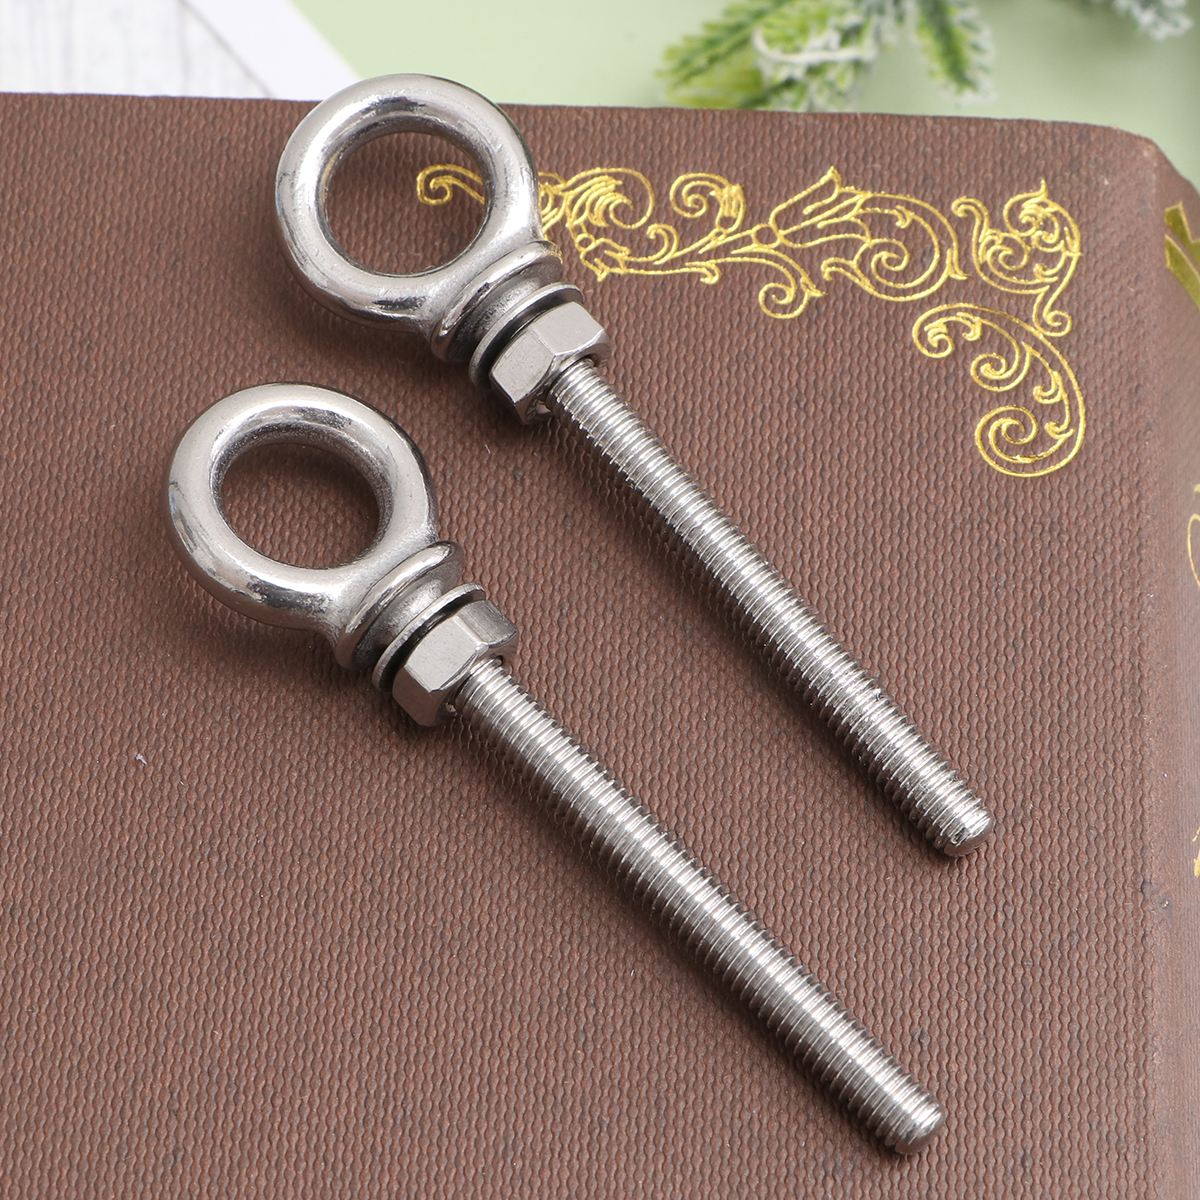 Durable Stainless Steel Lifting Eye Bolts with Nuts Swing Eyebolts Ring Hook Bolt Screw Fasterners (M10*100/M8*80/M6*60 - 316)